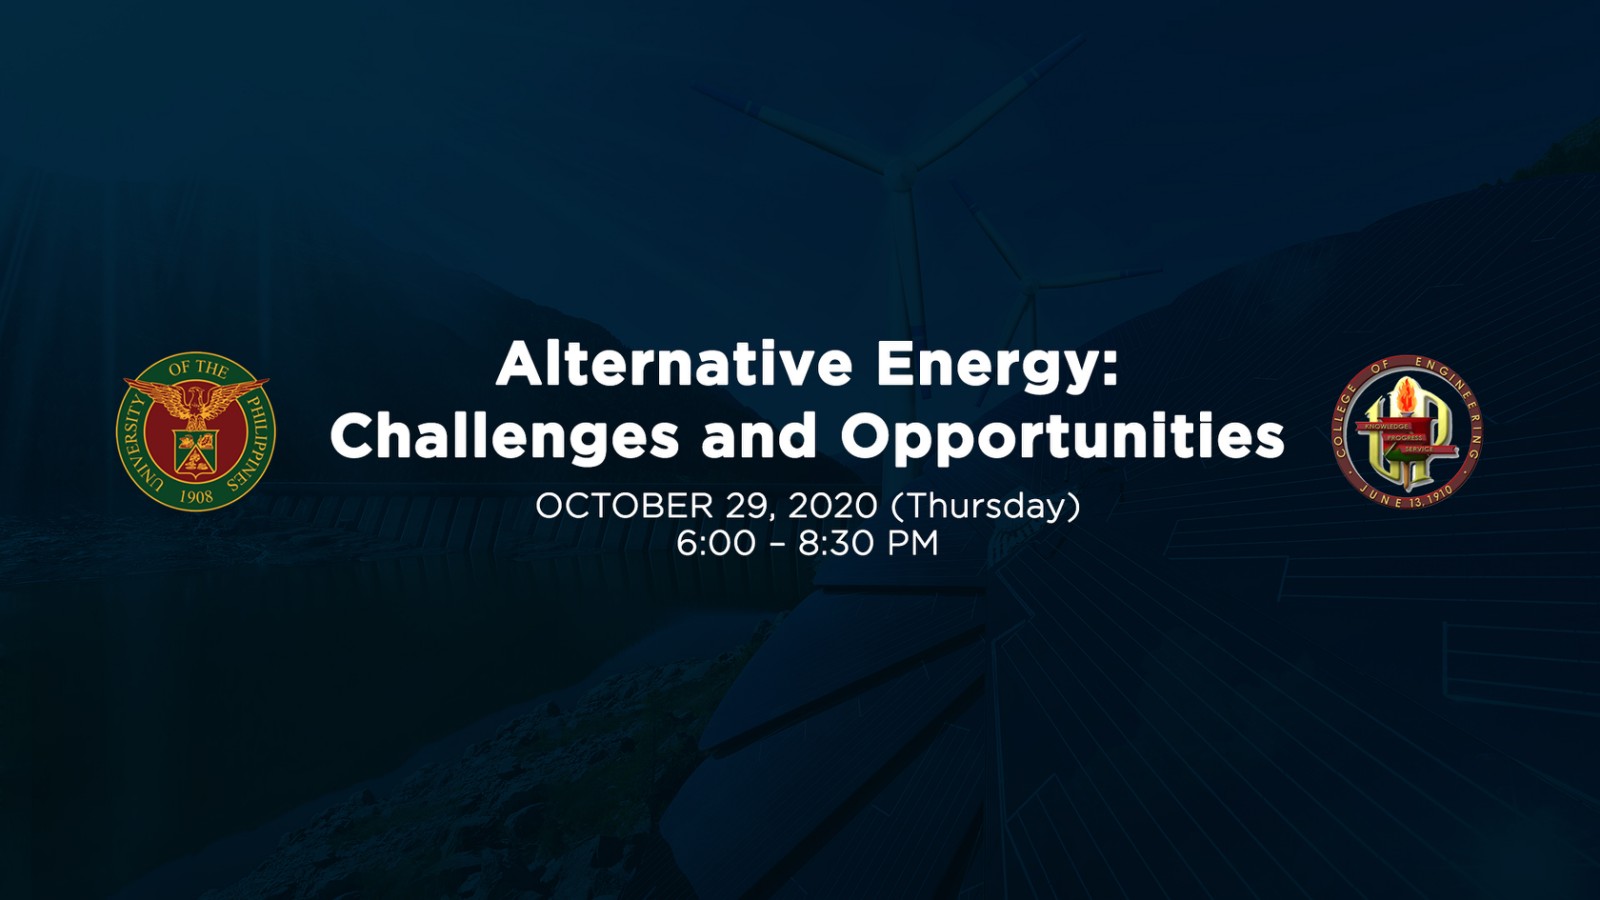 Webinar on Alternative Energy discussed current challenges and opportunities